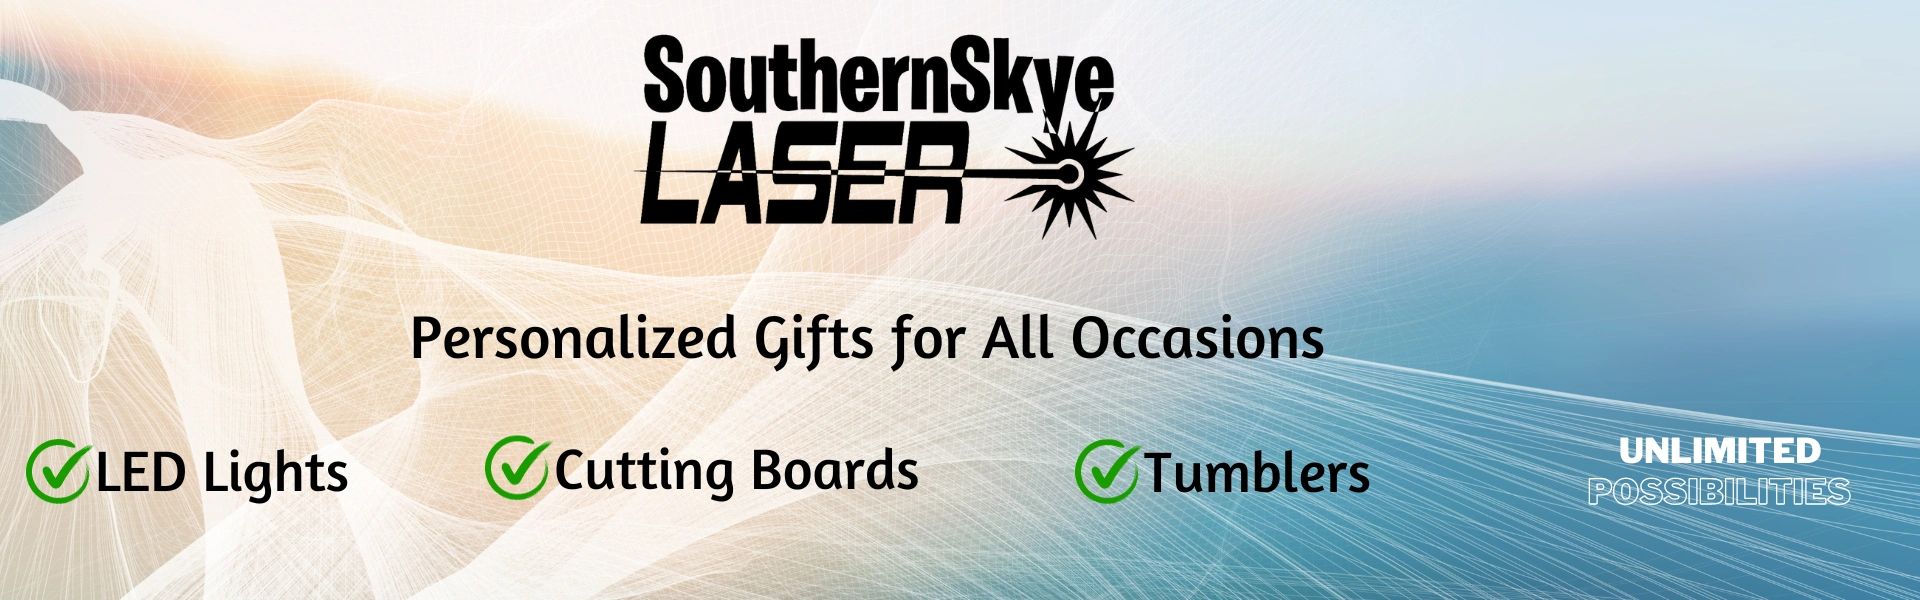 LED Lights, Cutting Boards, Tumblers, Personalized Gifts, Trophies, Awards, Employee Recognition